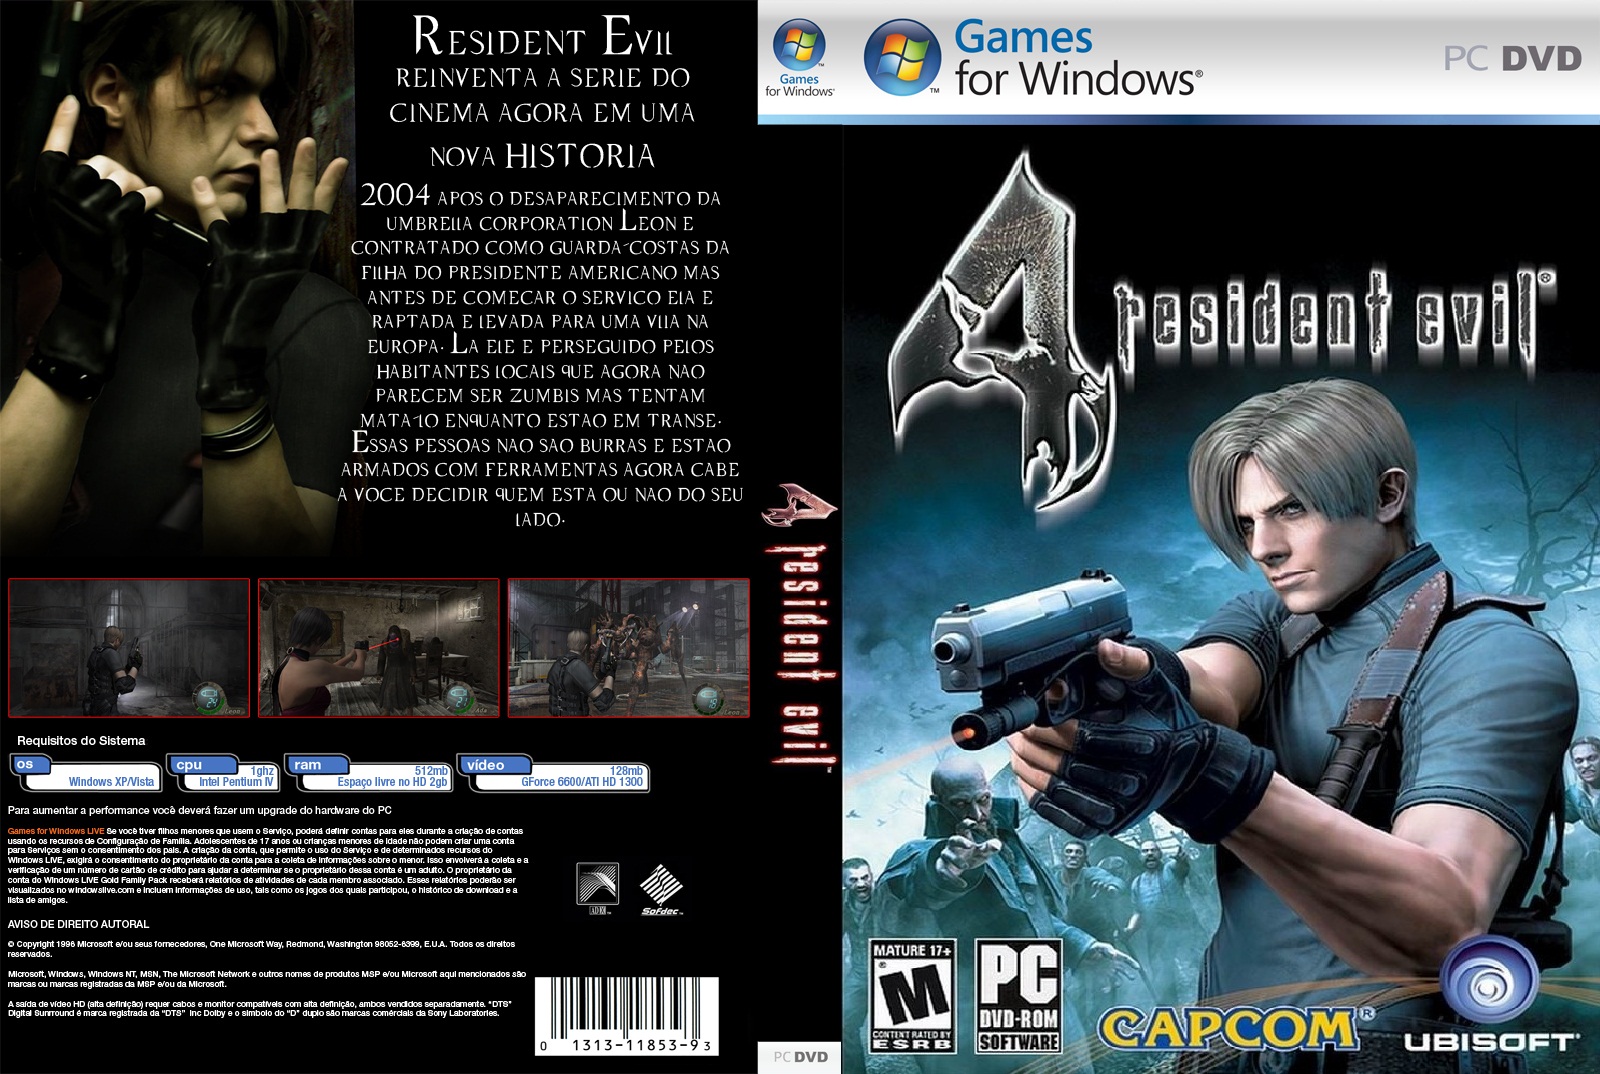 Resident Evil 4 Pc Trainer 1.1.0 Download